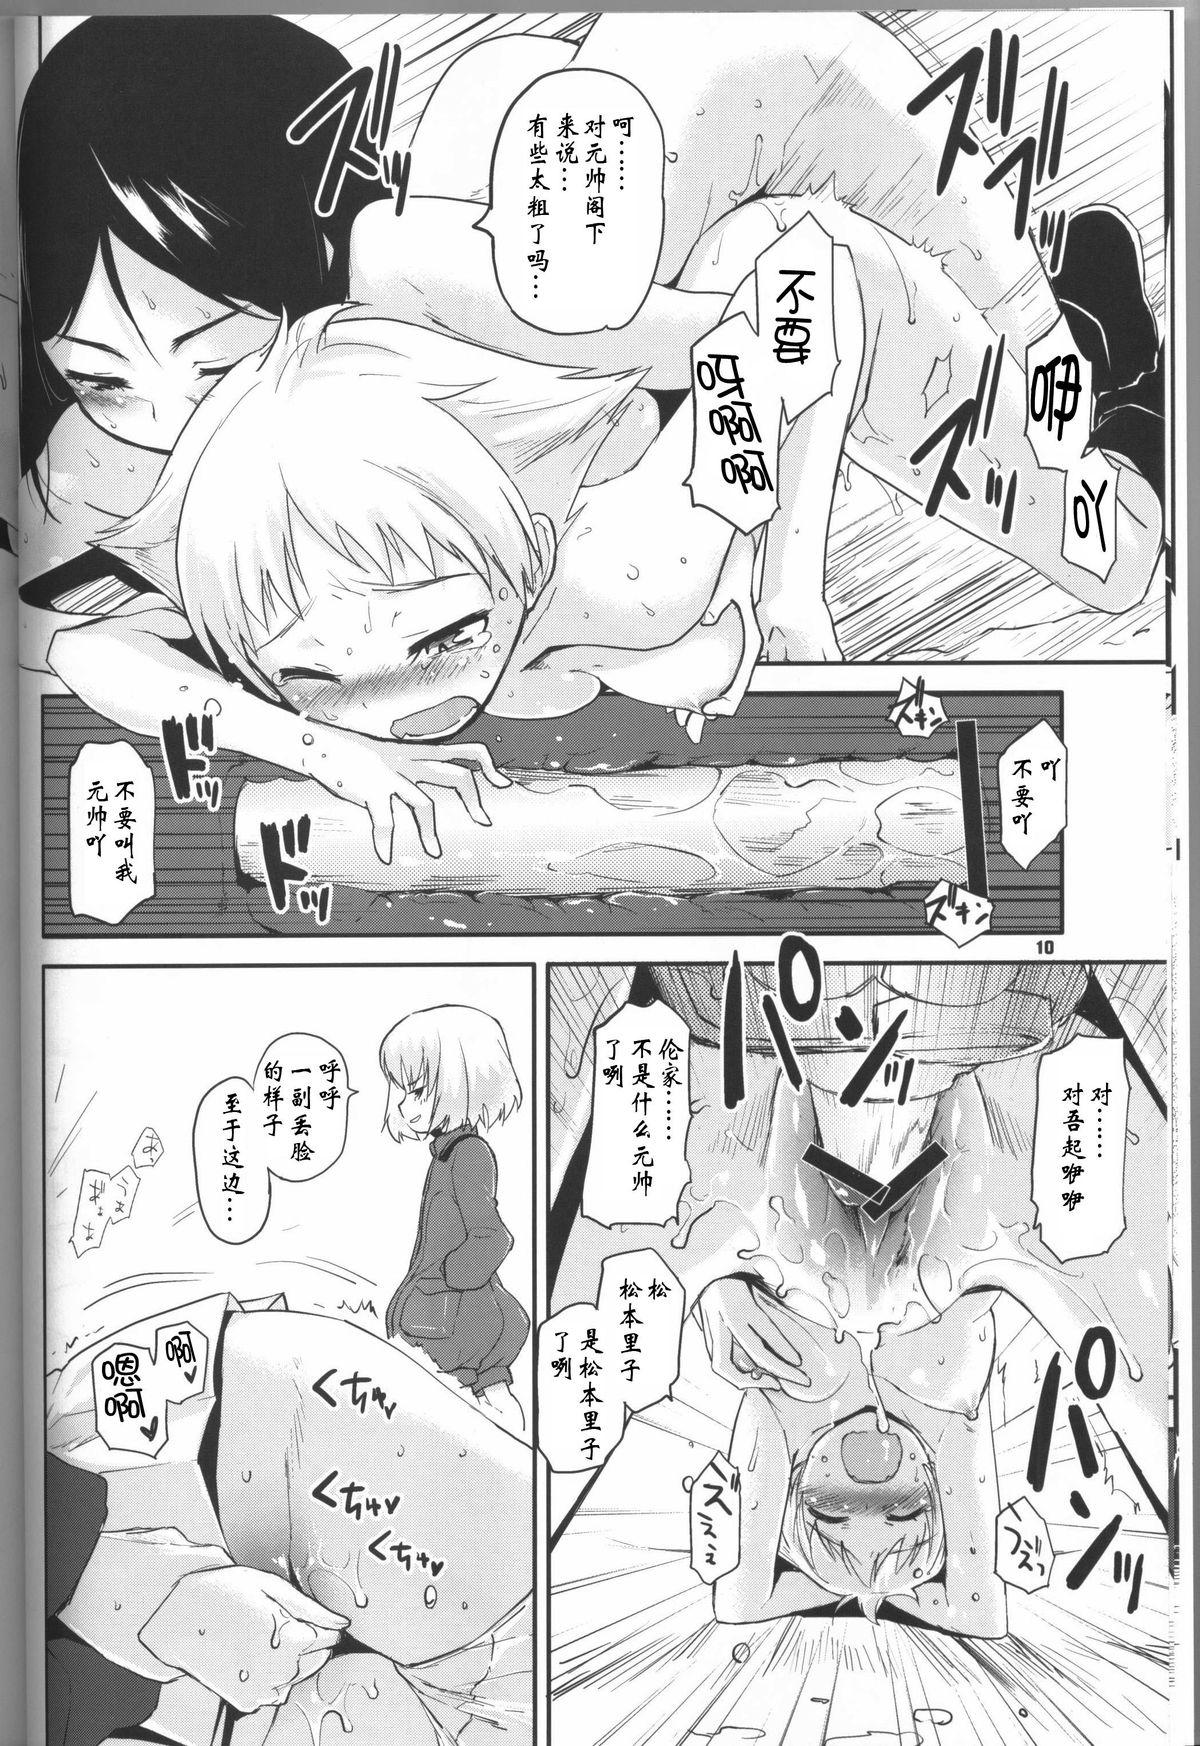 Bangbros The General Frost Has Come! - Girls und panzer Slapping - Page 9